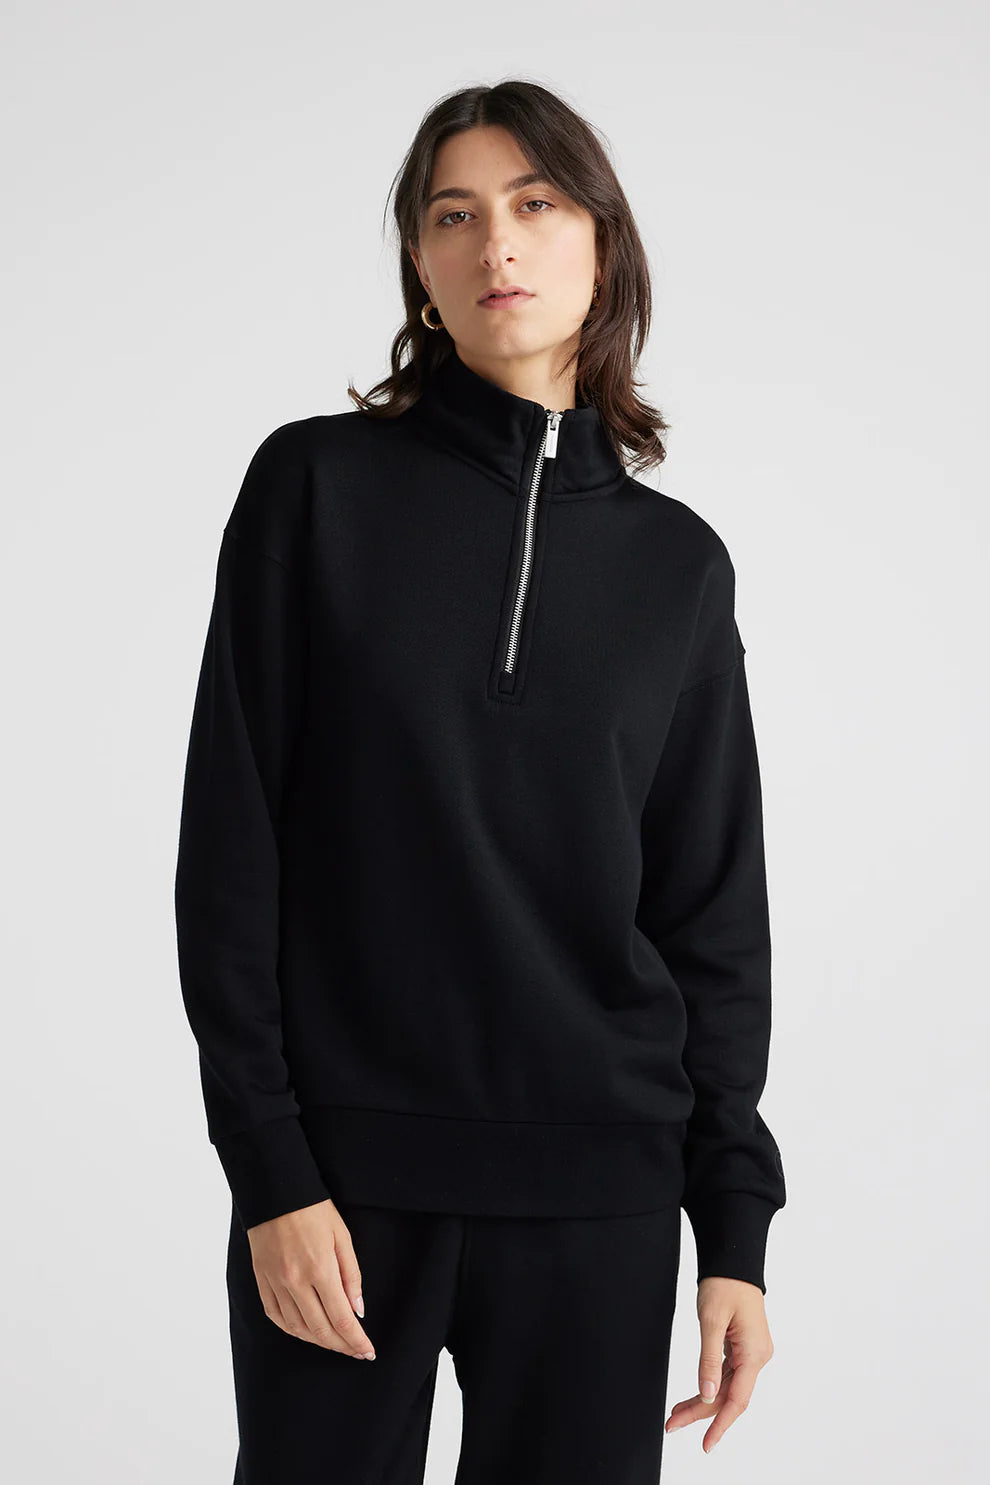 Elevate your wardrobe with our sleek black Merino wool zip sweater. Effortlessly chic, irresistibly comfortable